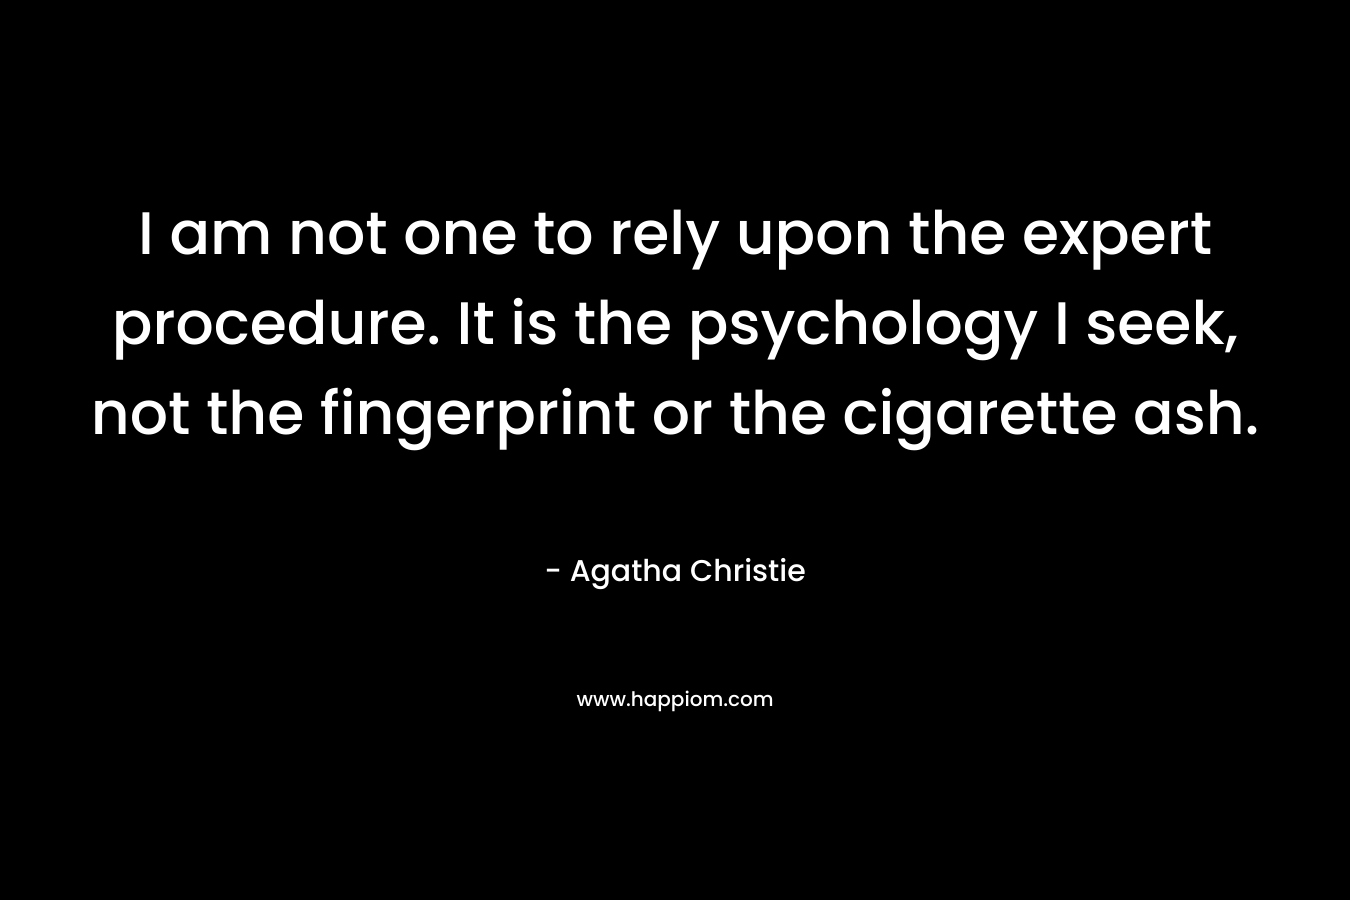 I am not one to rely upon the expert procedure. It is the psychology I seek, not the fingerprint or the cigarette ash. – Agatha Christie